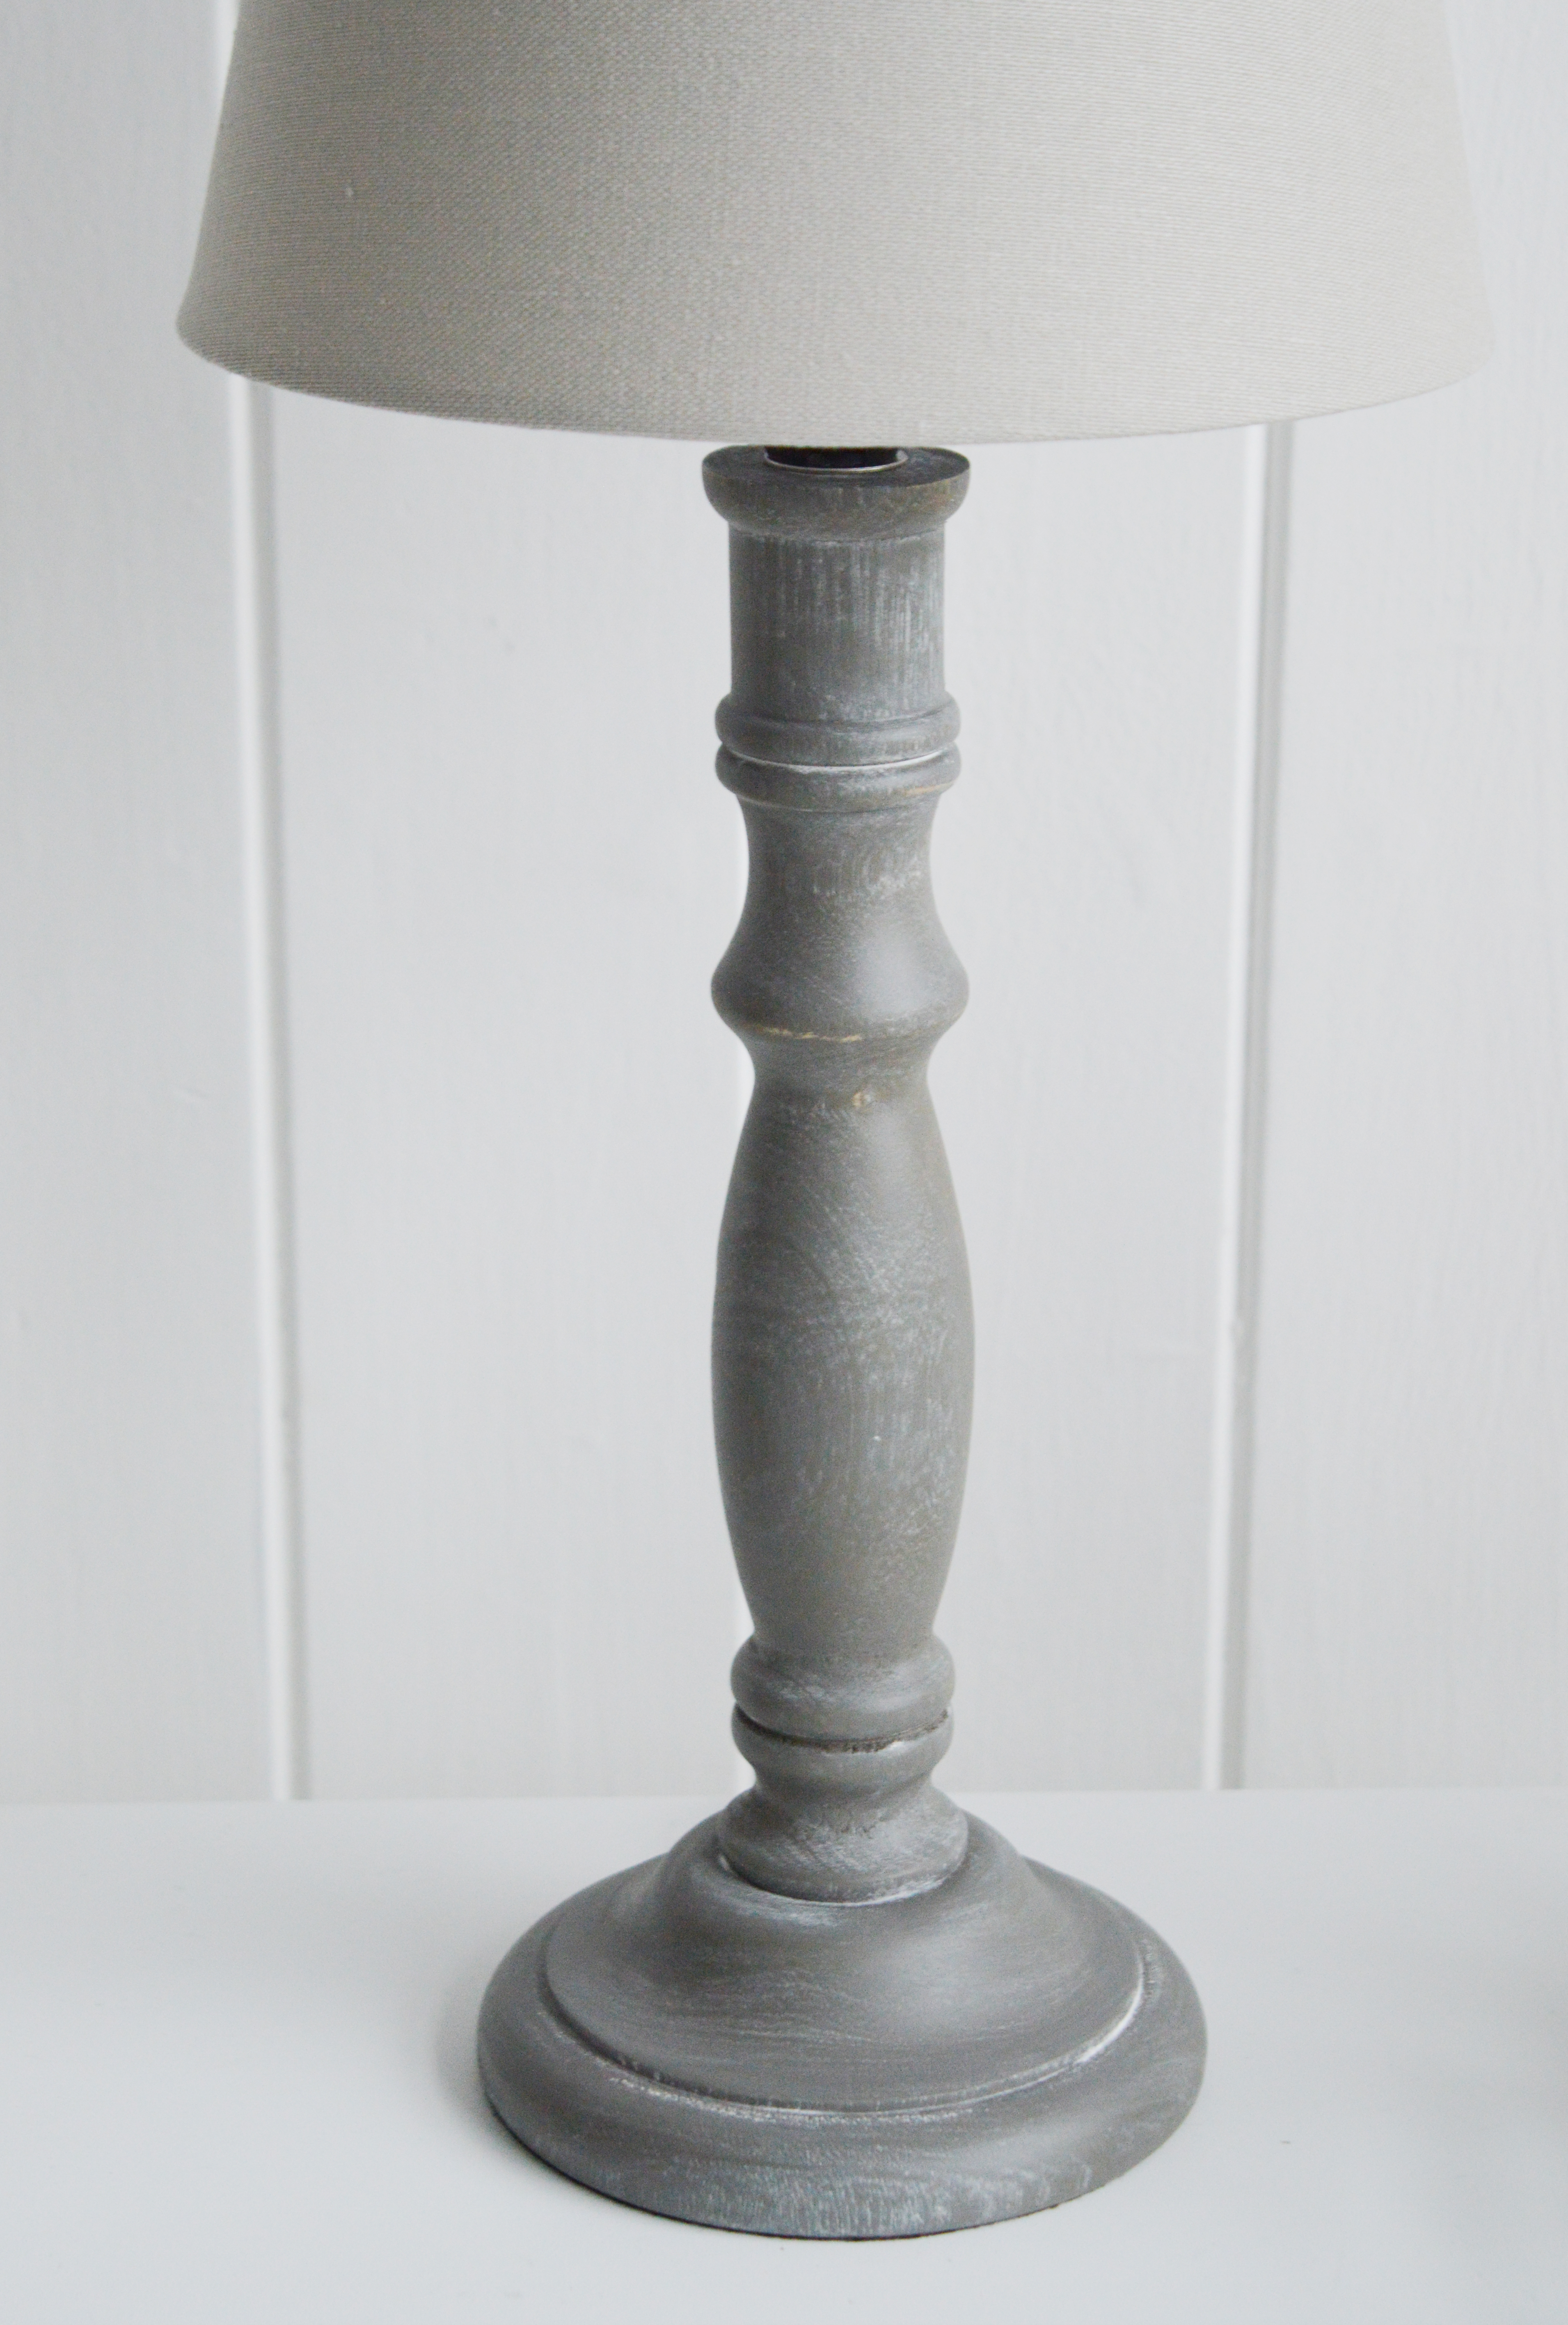 Little Compton Lamp  from The White Lighthouse Furniture. A lovely table lamp for bedside table or living room or bedroom furniture. New England style table lamps